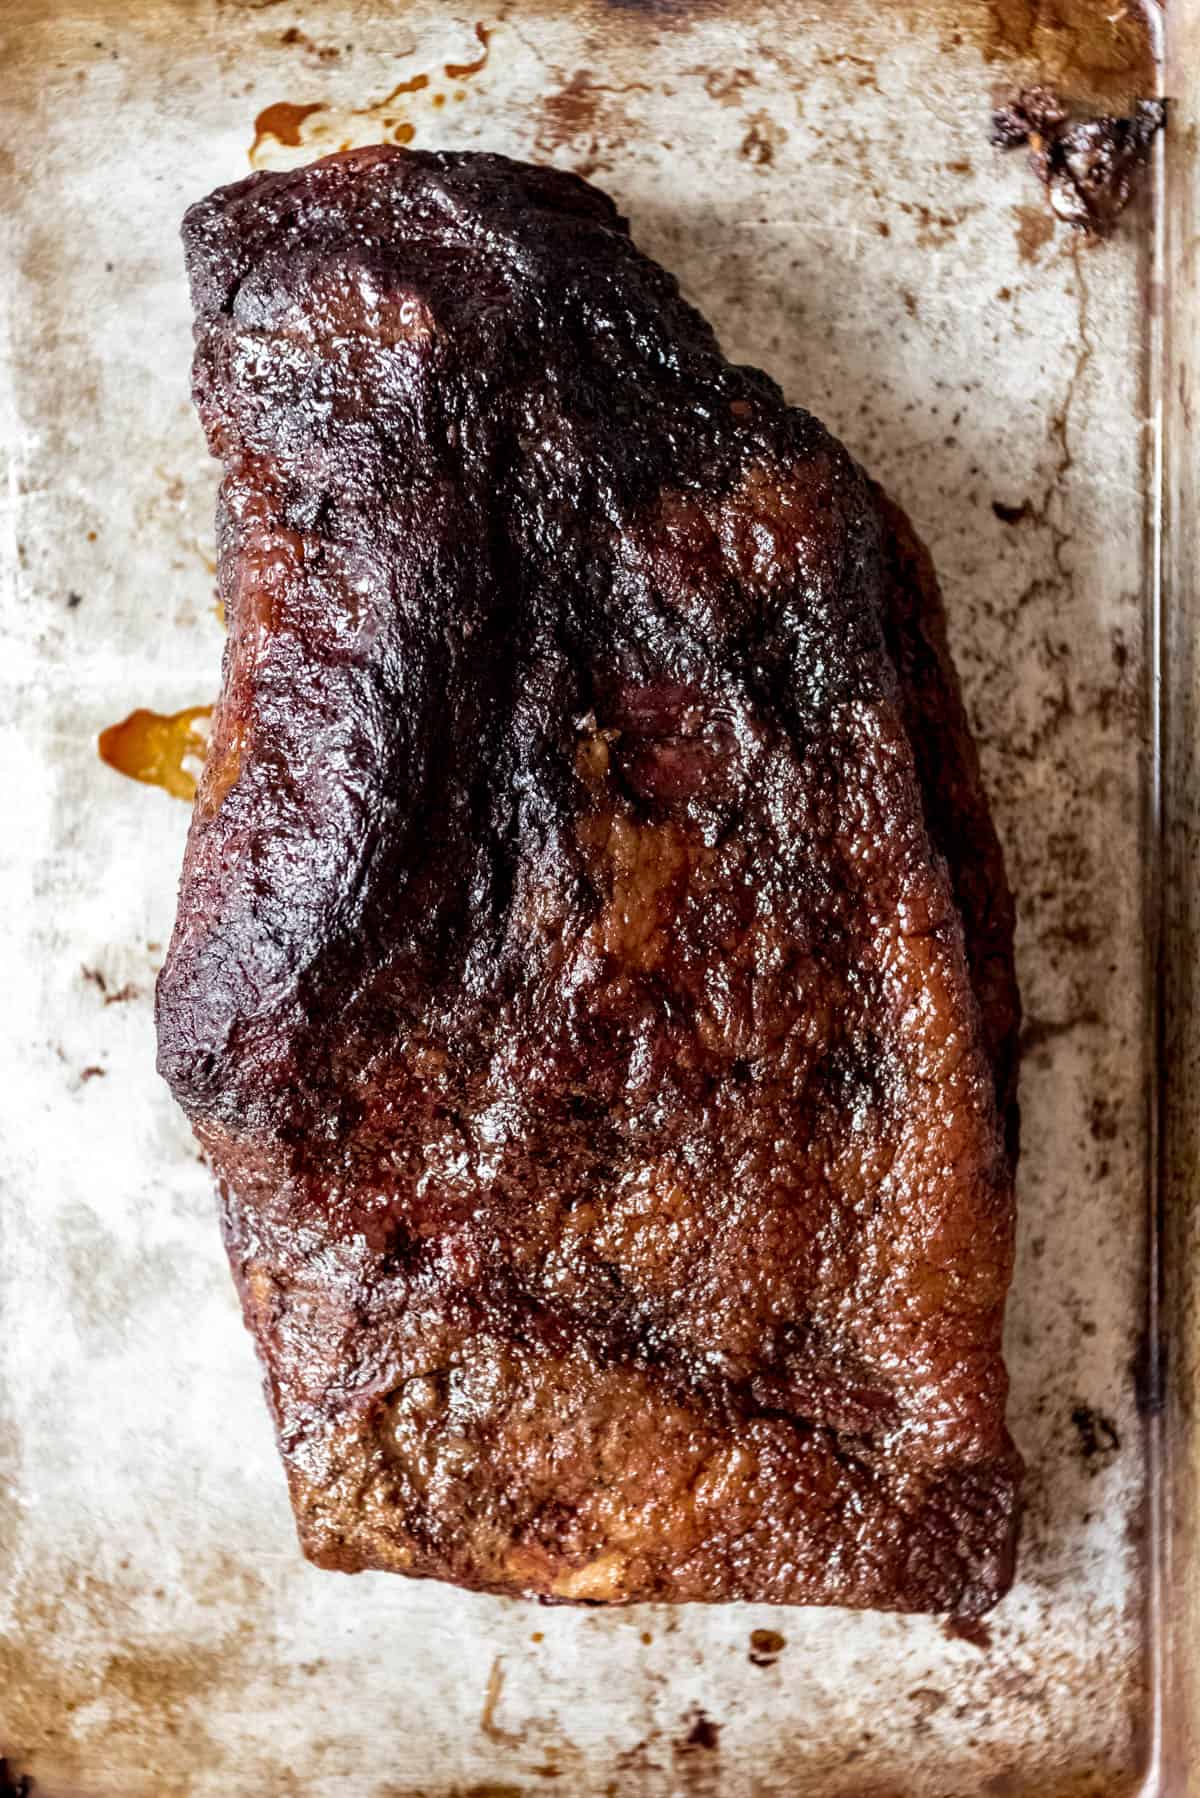 An image of a whole smoked beef brisket resting before being sliced.